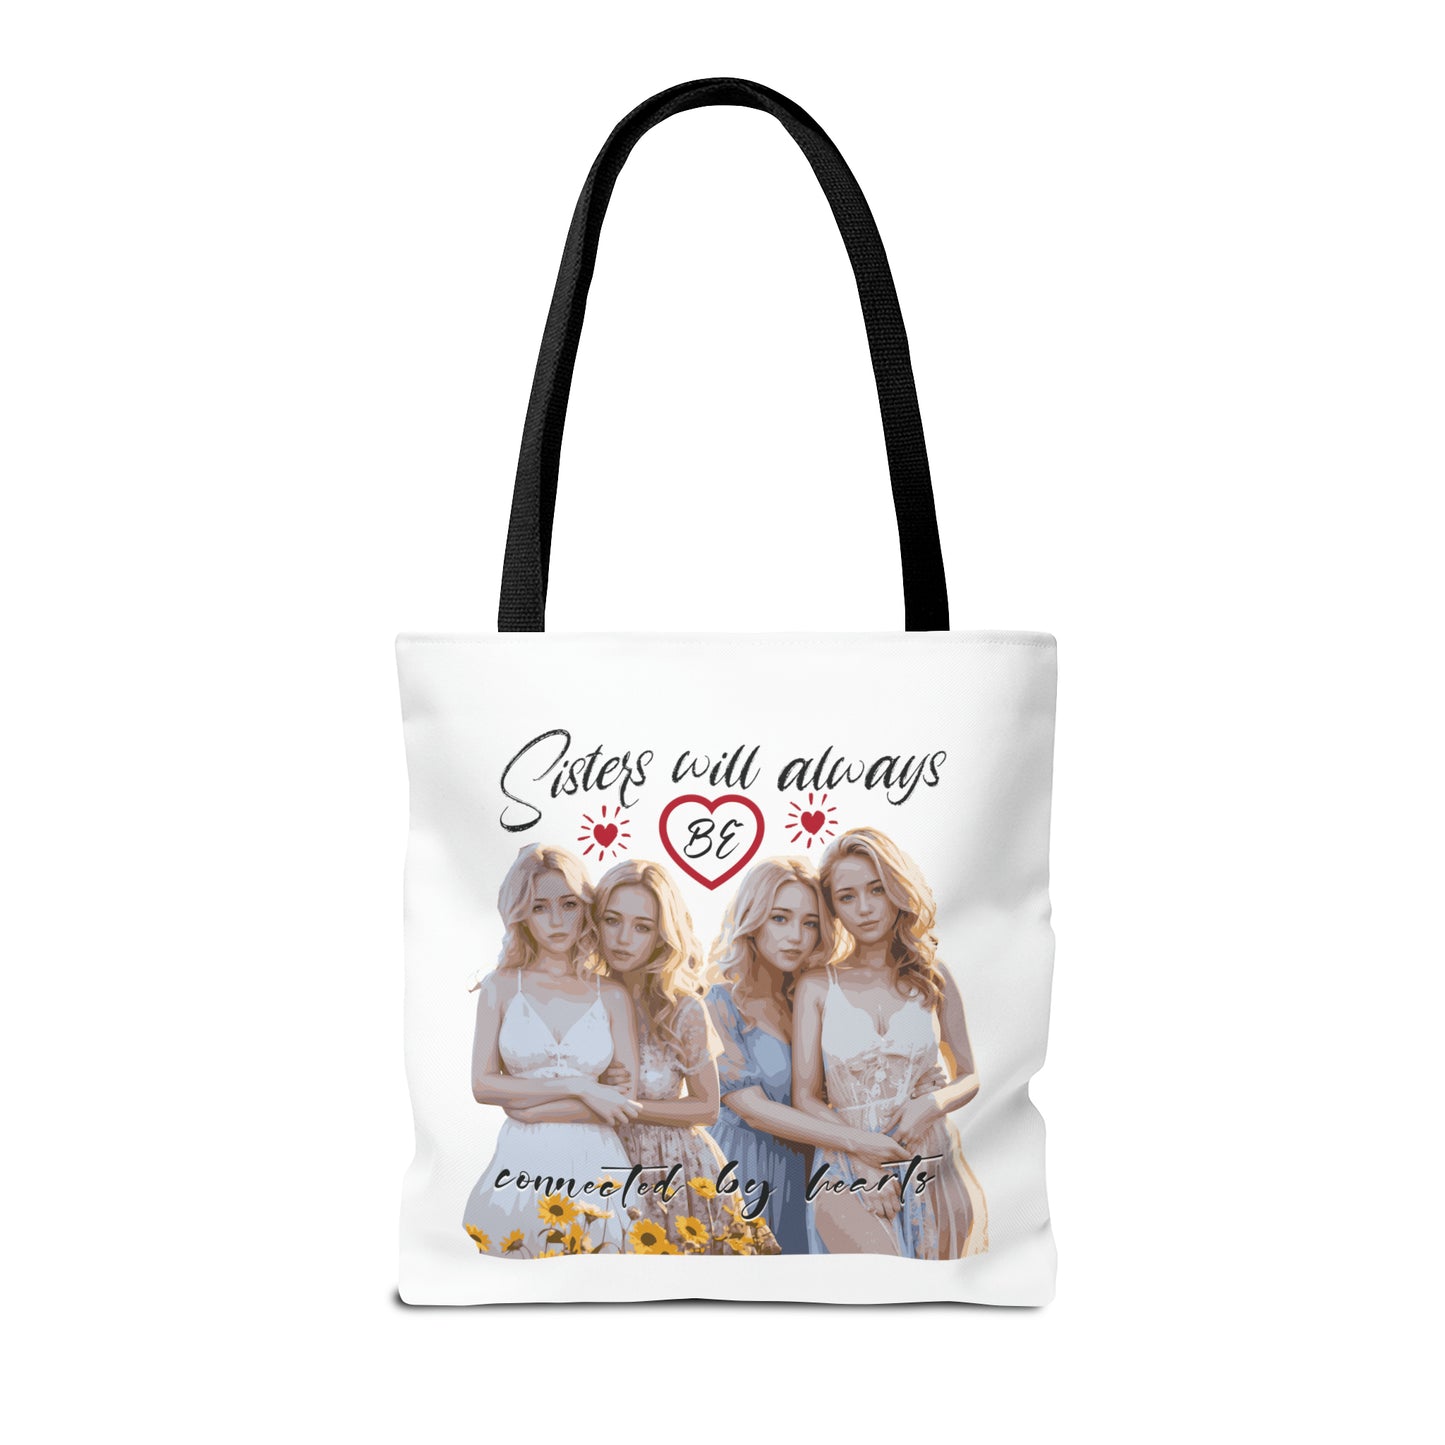 Sisters will always be connected by hearts - Tote Bag (AOP)